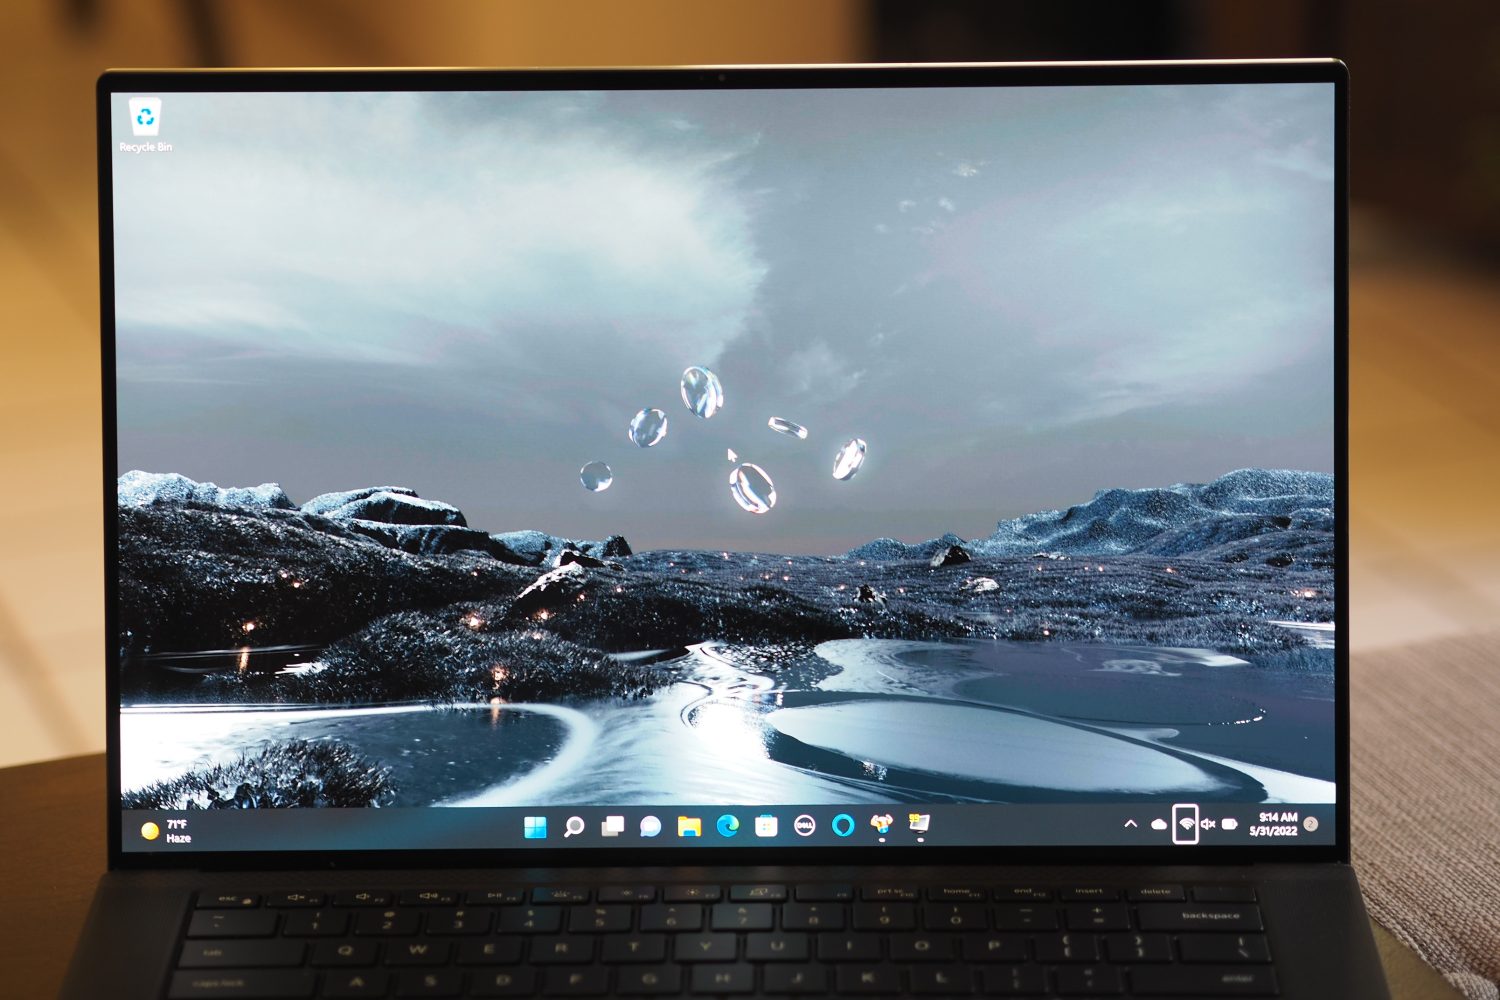 Dell XPS 15 review: 4K media work on the go